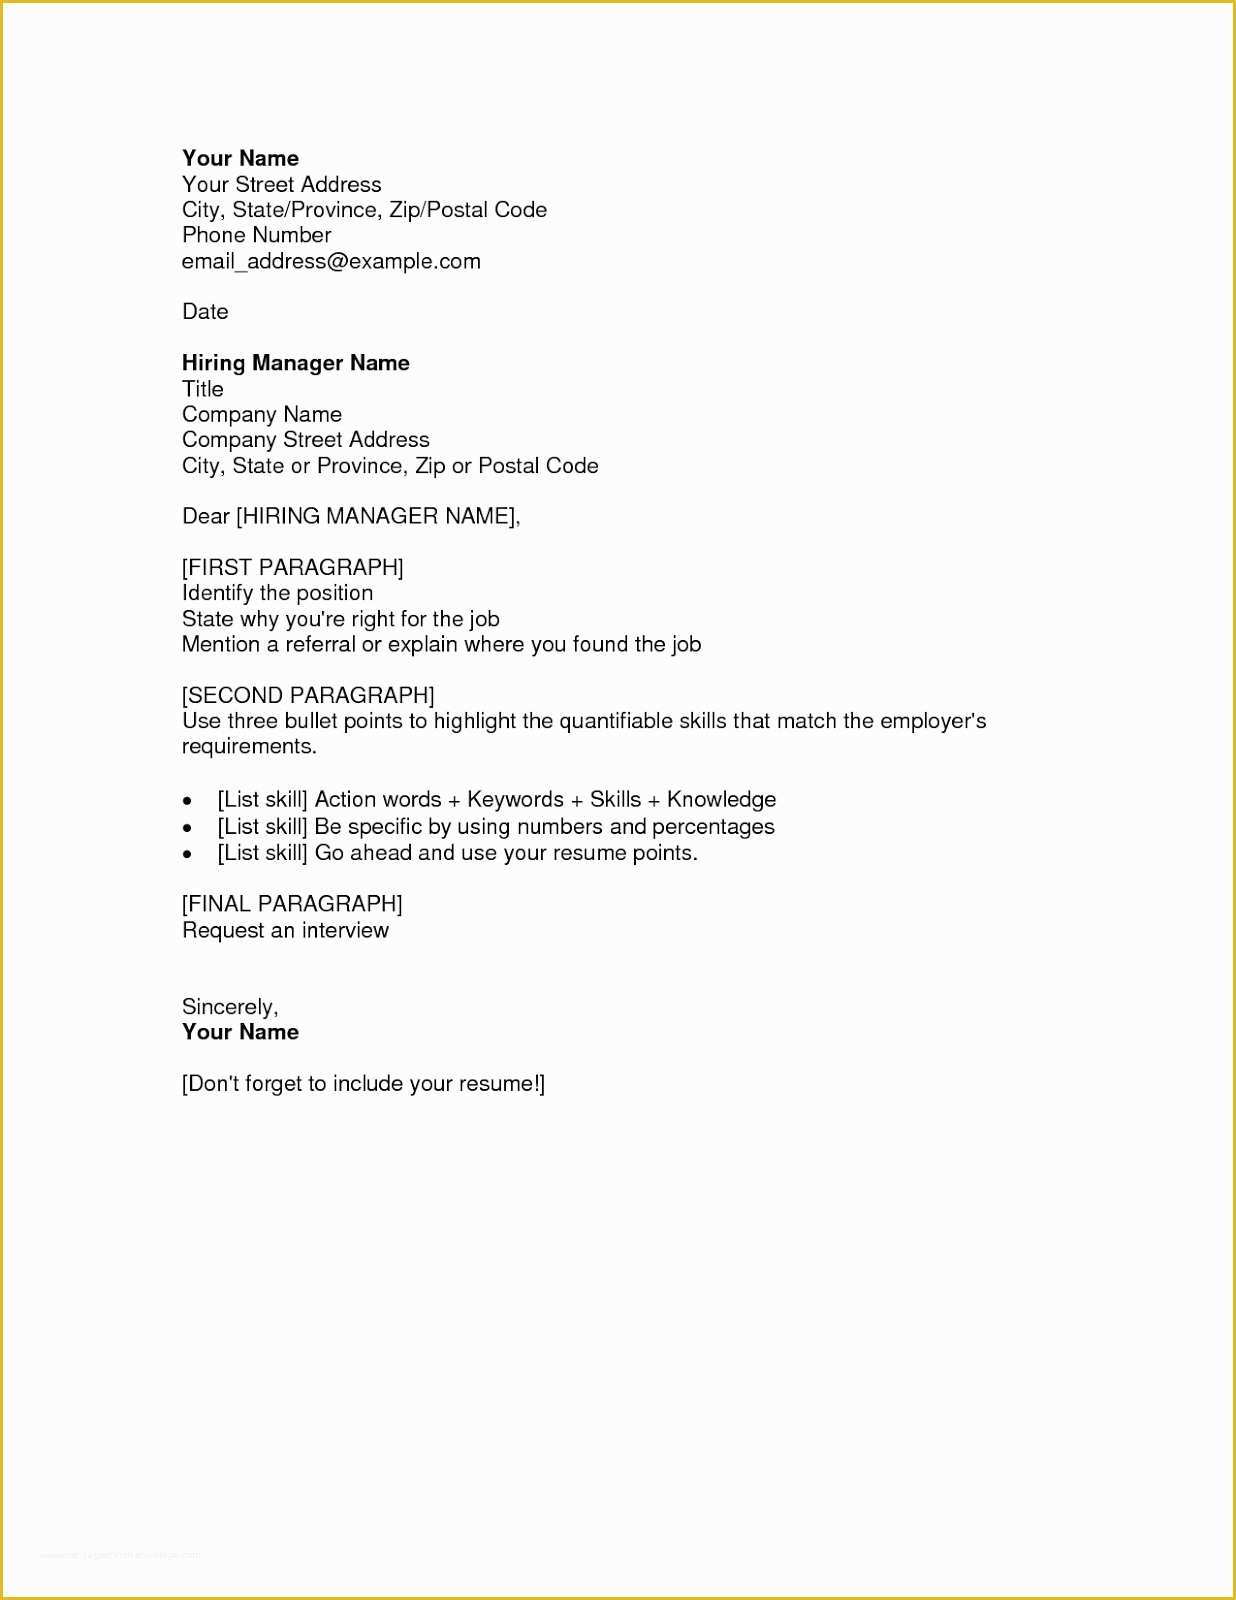 Free Matching Cover Letter and Resume Templates Of Free Cover Letter Samples for Resumes